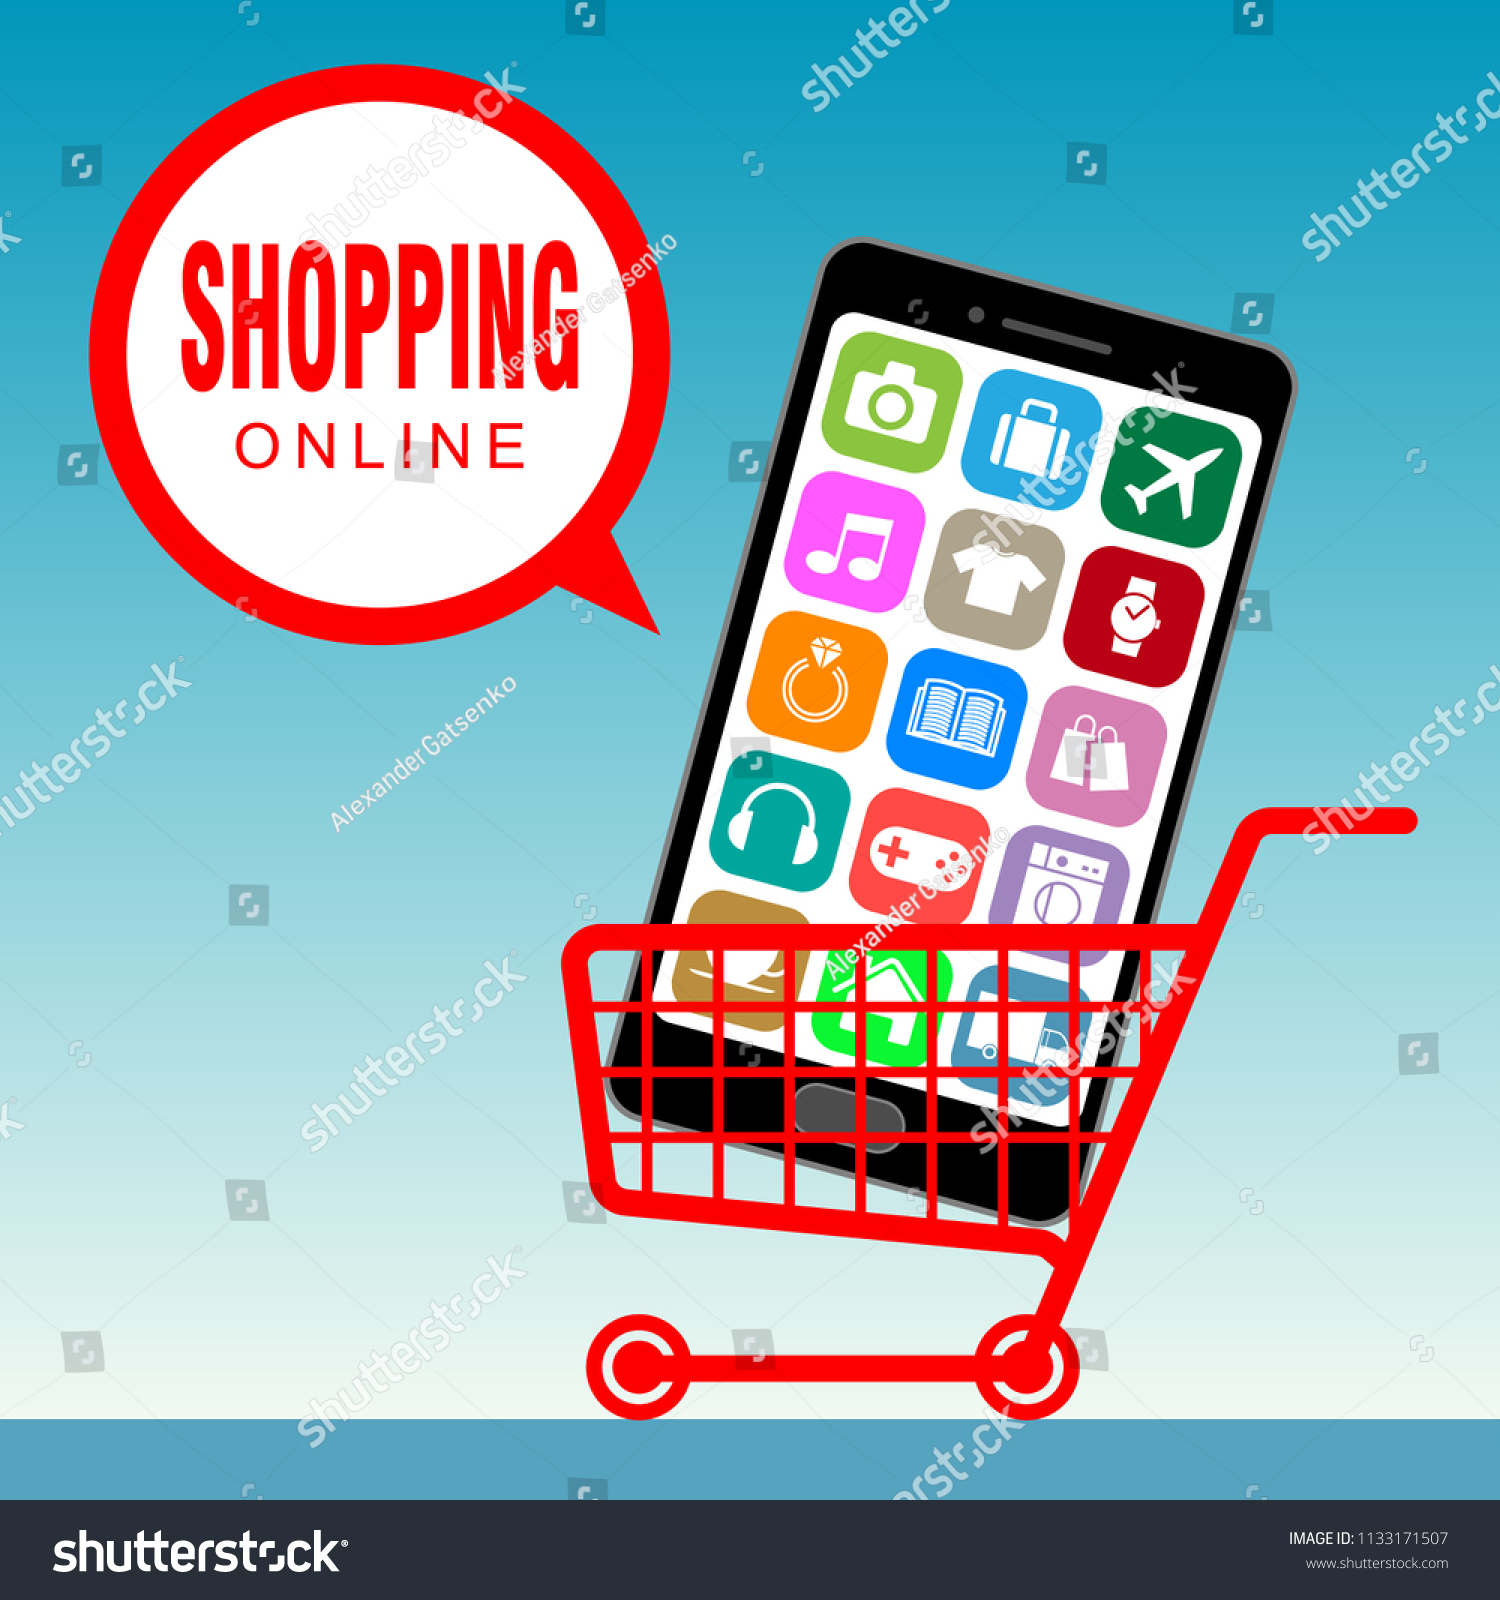 Shopping cart with smartphone inside, e-commerce concept  #1133171507